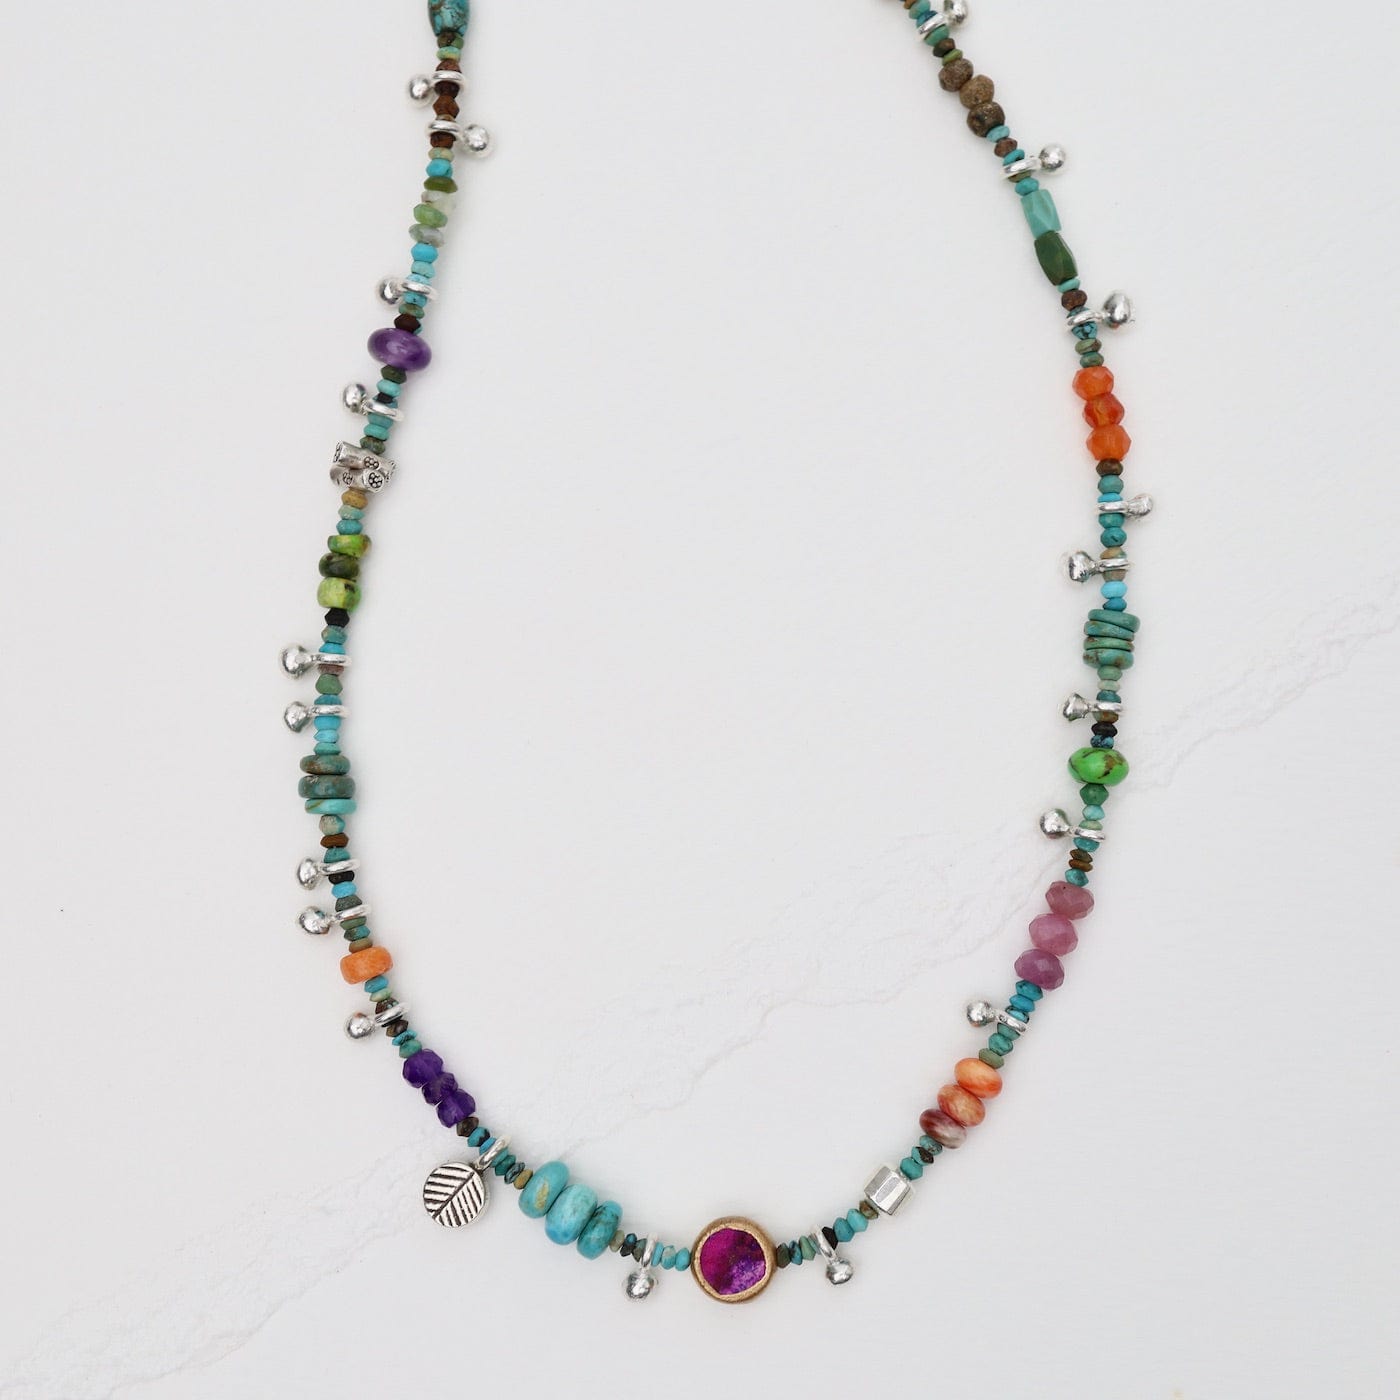 NKL 53 & Me Turquoise Necklace